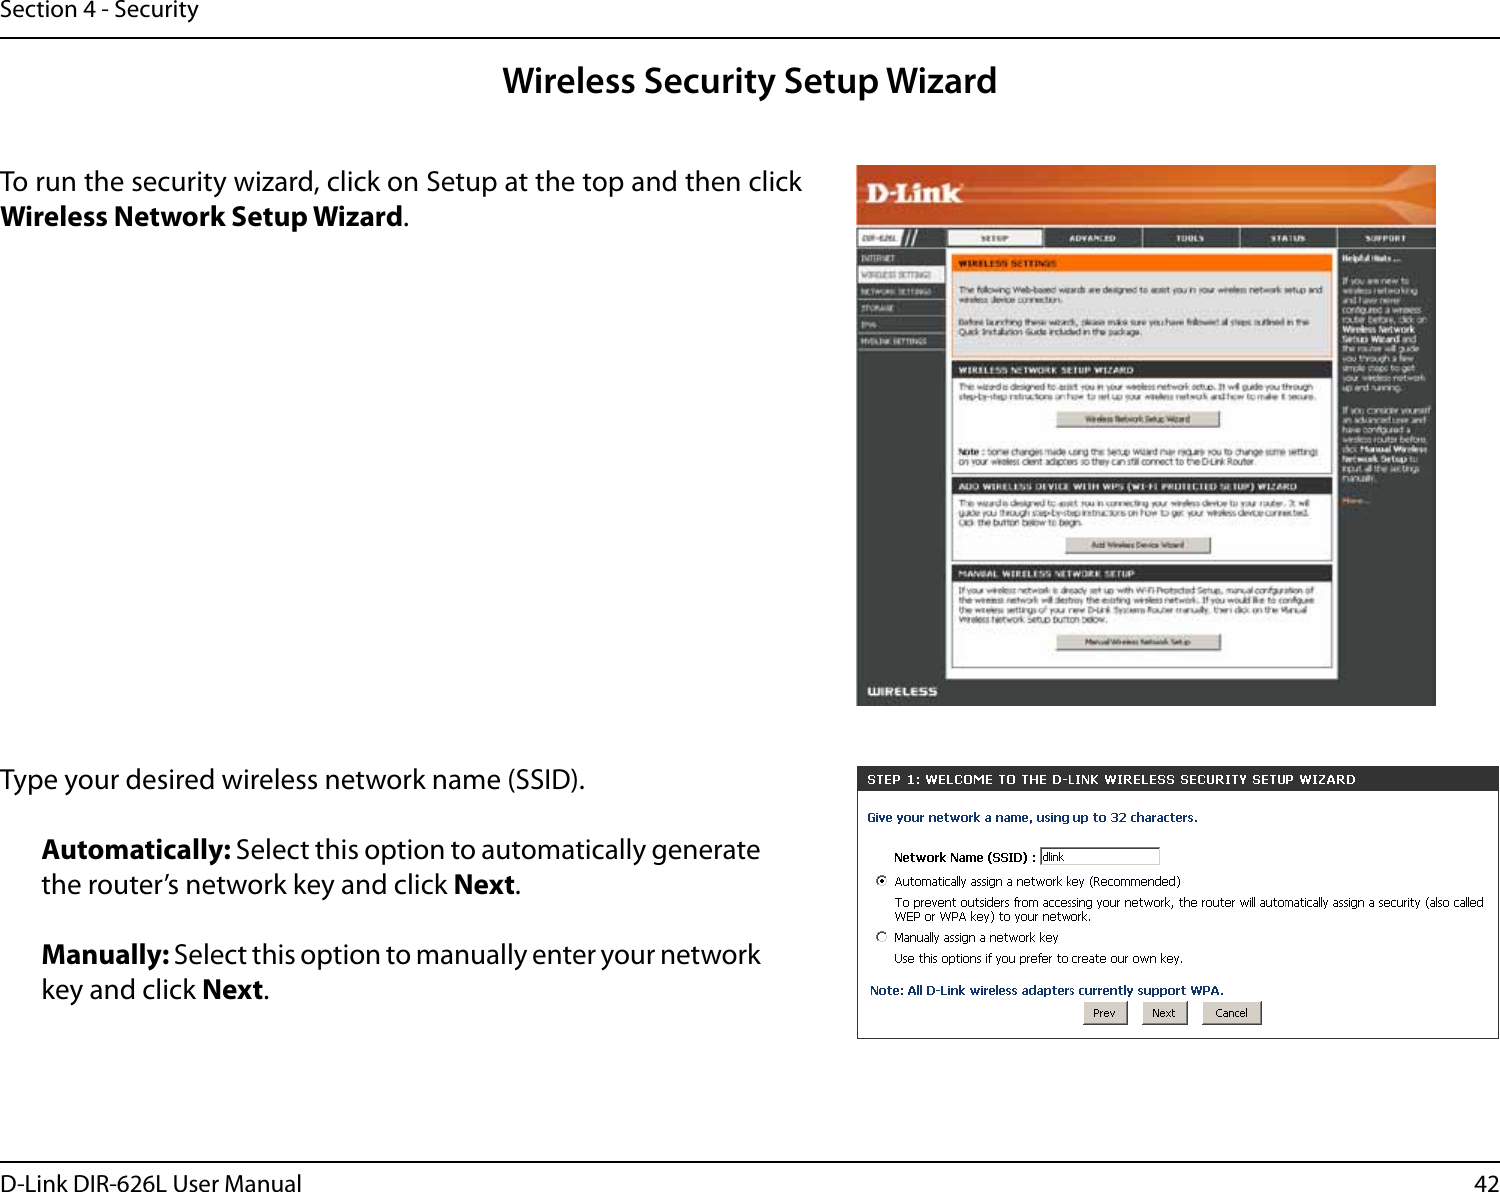 42D-Link DIR-626L User ManualSection 4 - SecurityWireless Security Setup WizardTo run the security wizard, click on Setup at the top and then click Wireless Network Setup Wizard.Type your desired wireless network name (SSID). Automatically: Select this option to automatically generate the router’s network key and click Next.Manually: Select this option to manually enter your network key and click Next.